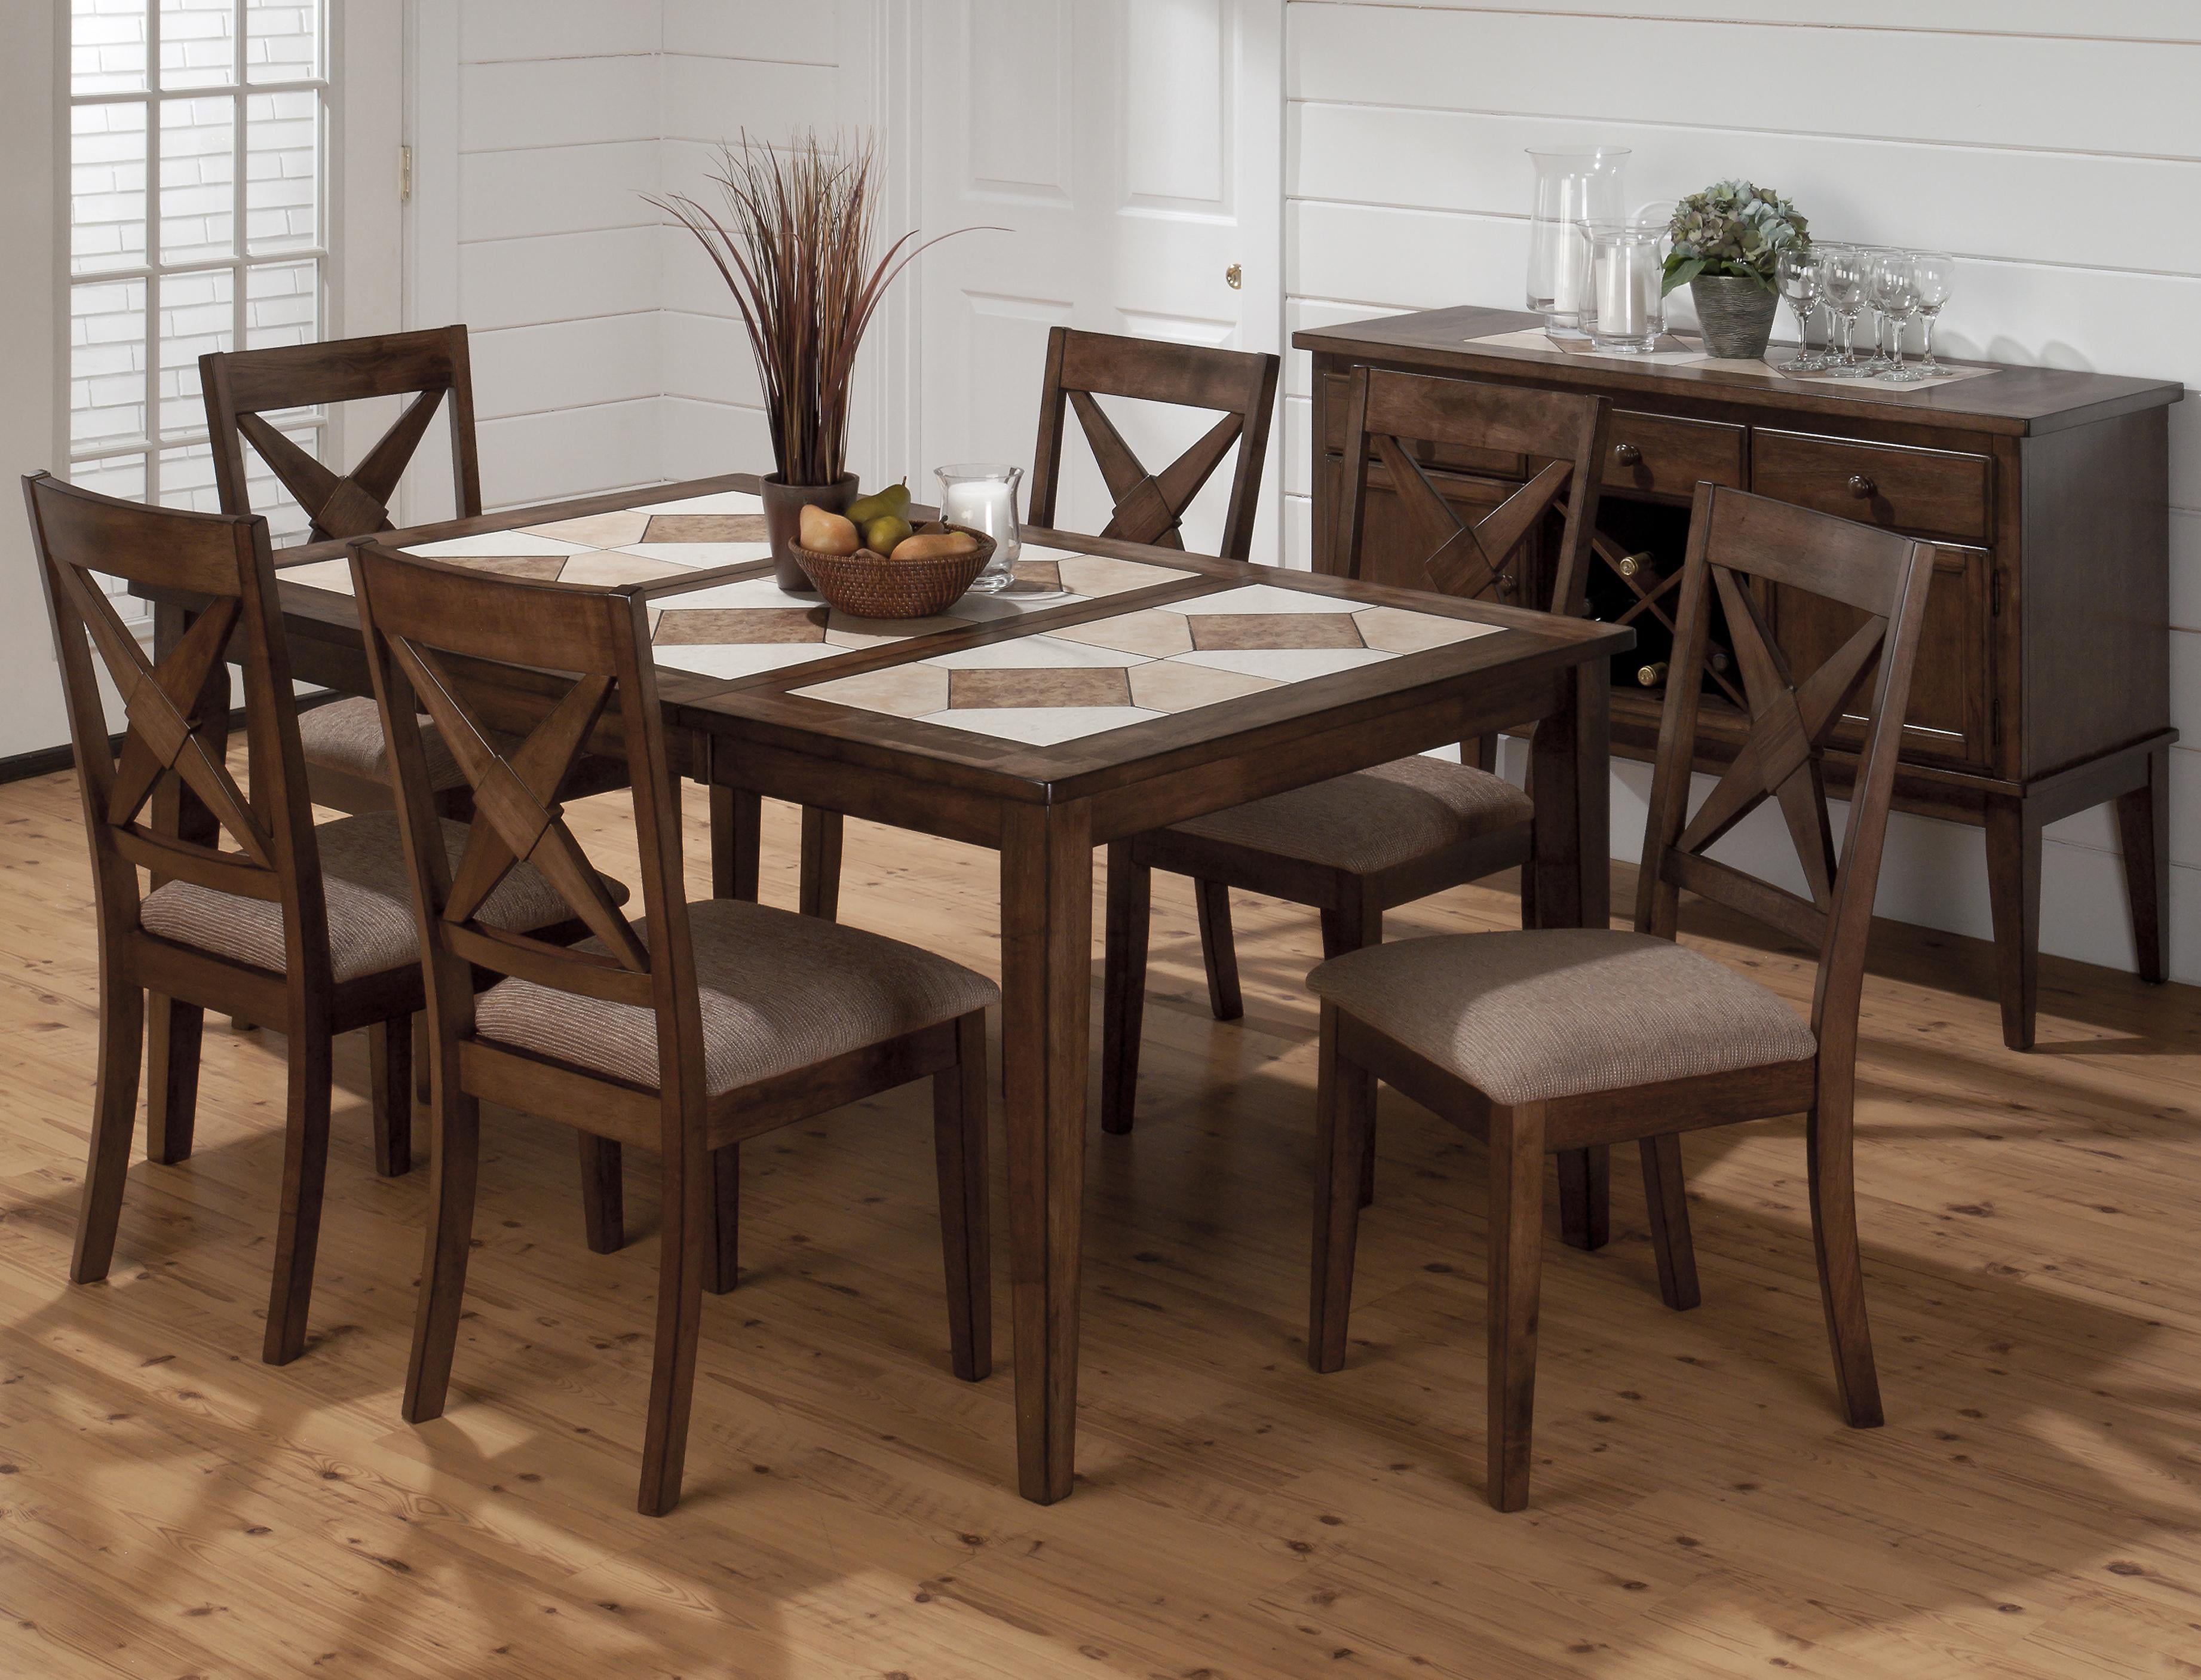 Tucson Dining Table With Ceramic Tile, Round Kitchen Table With Ceramic Tile Top